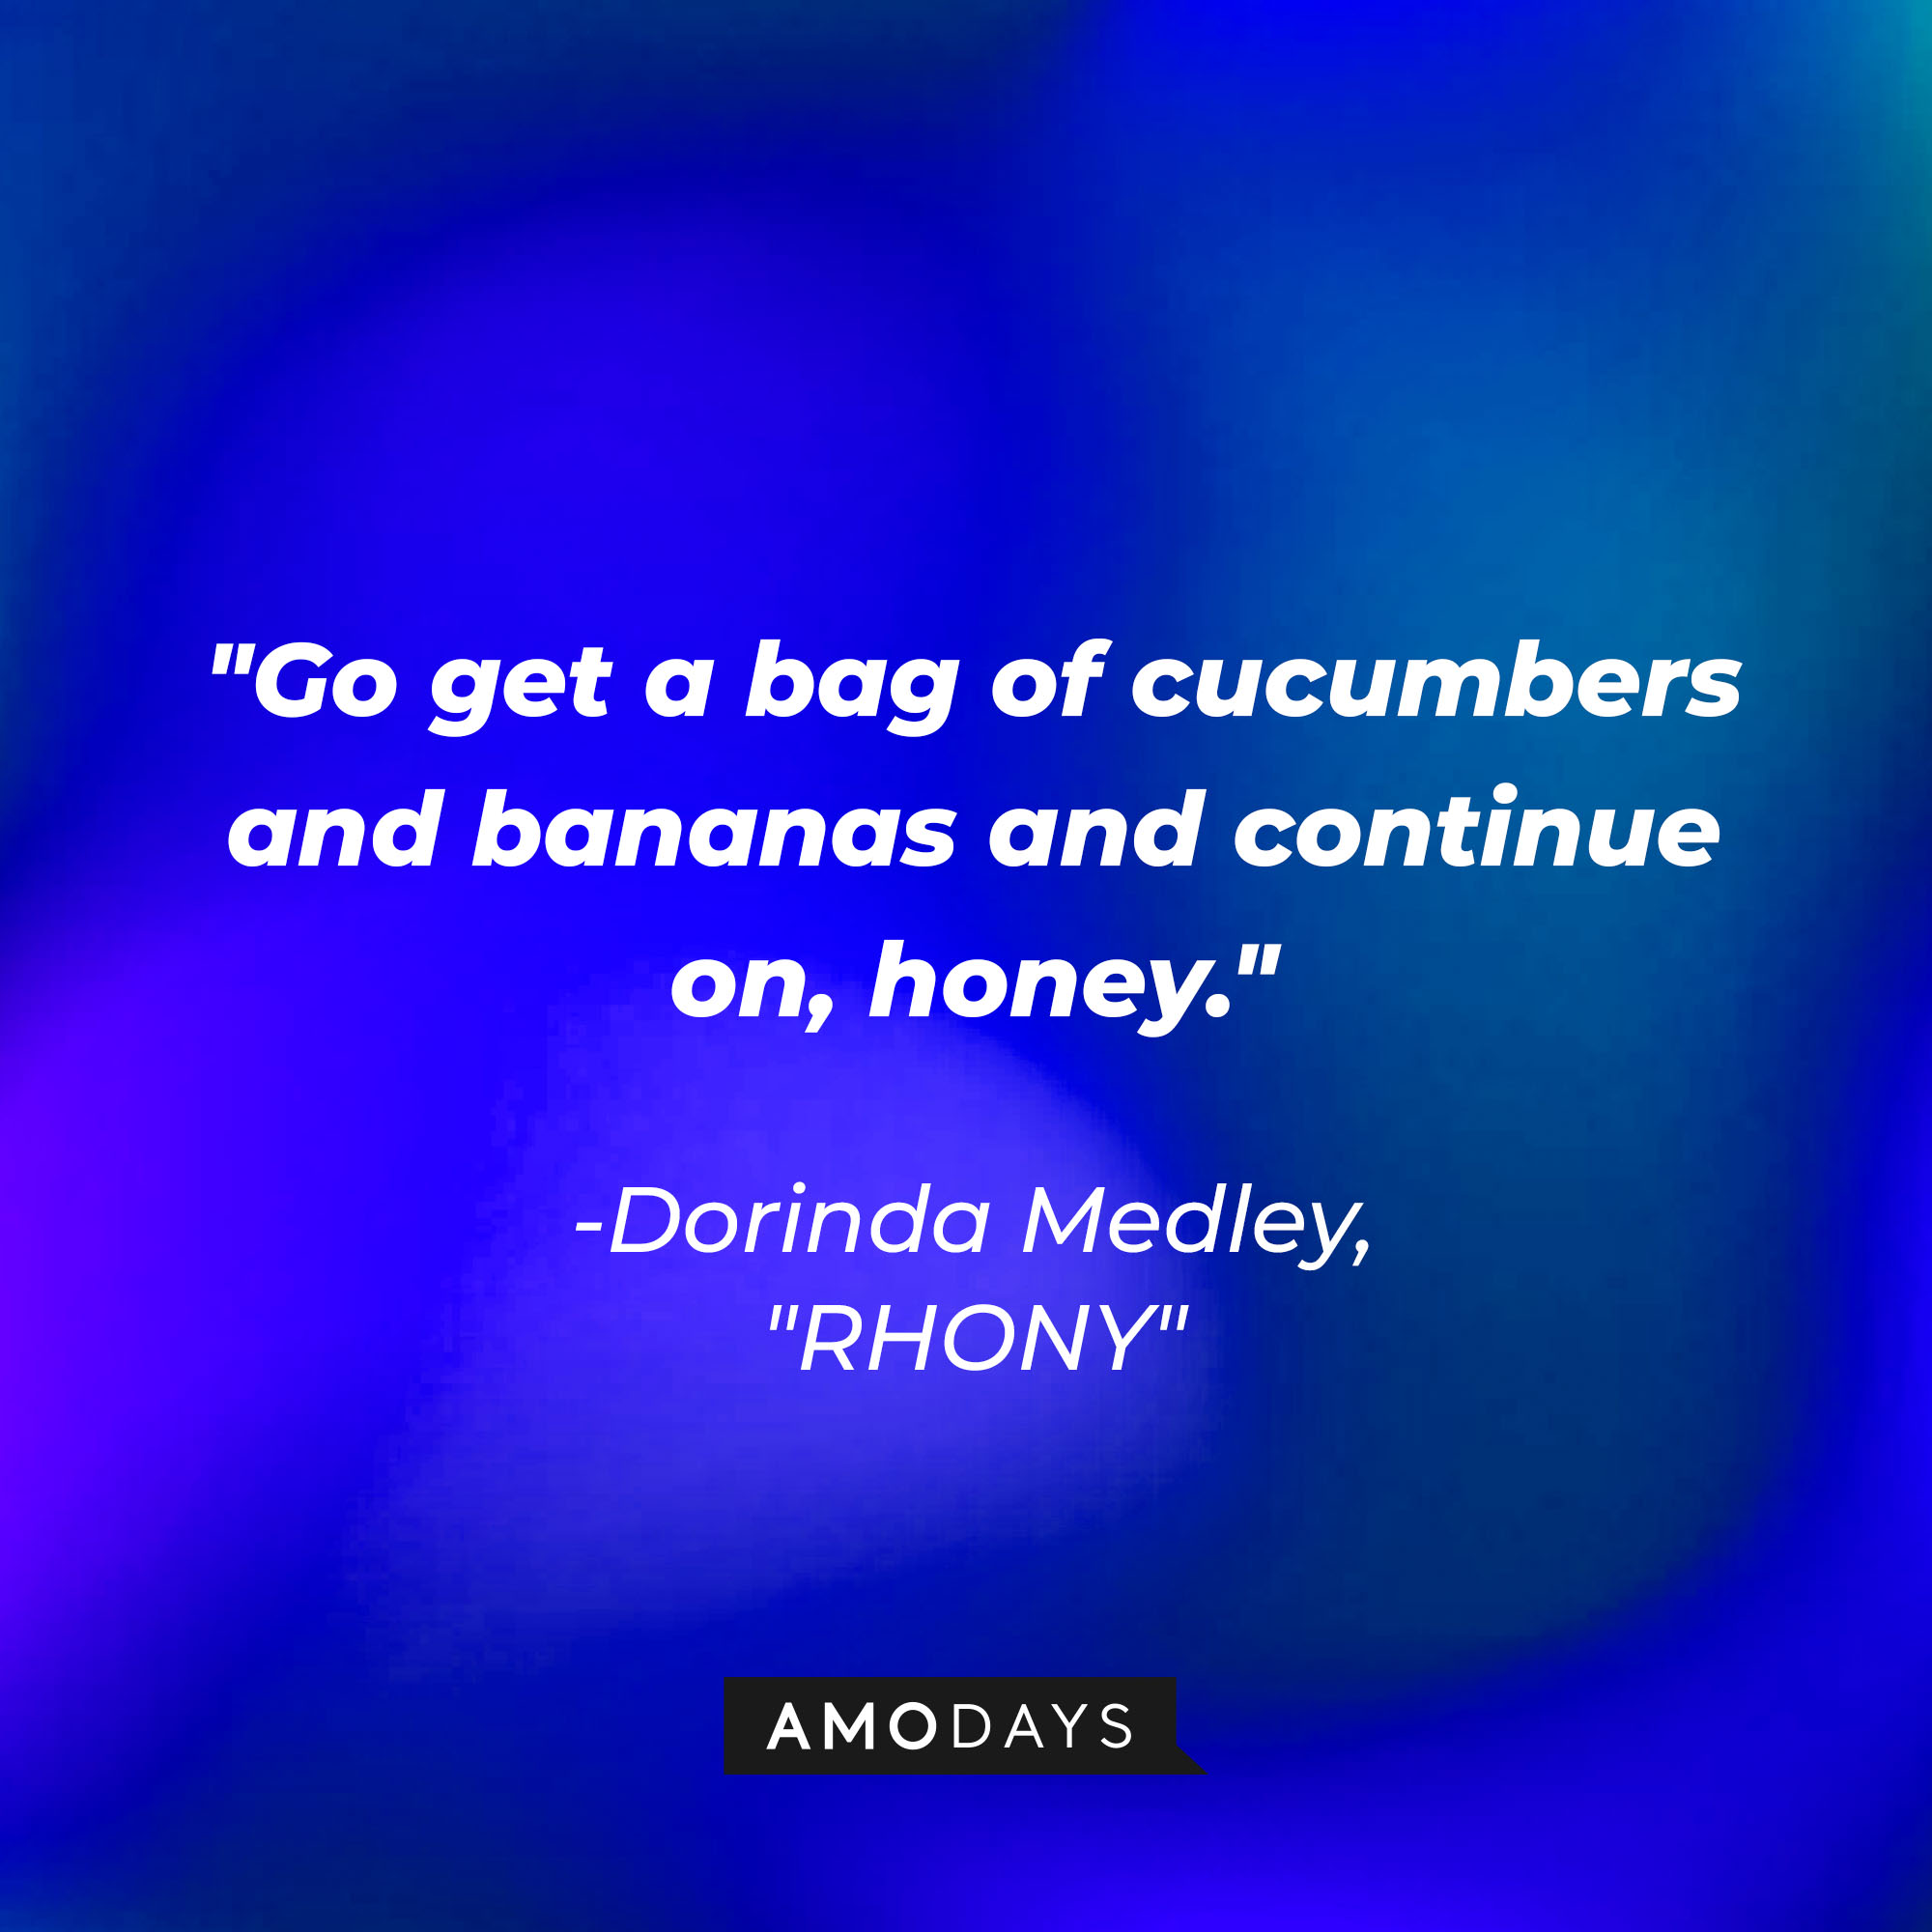 Dorinda Medley's quote: "Go get a bag of cucumbers and bananas and continue on, honey" | Source: Amodays